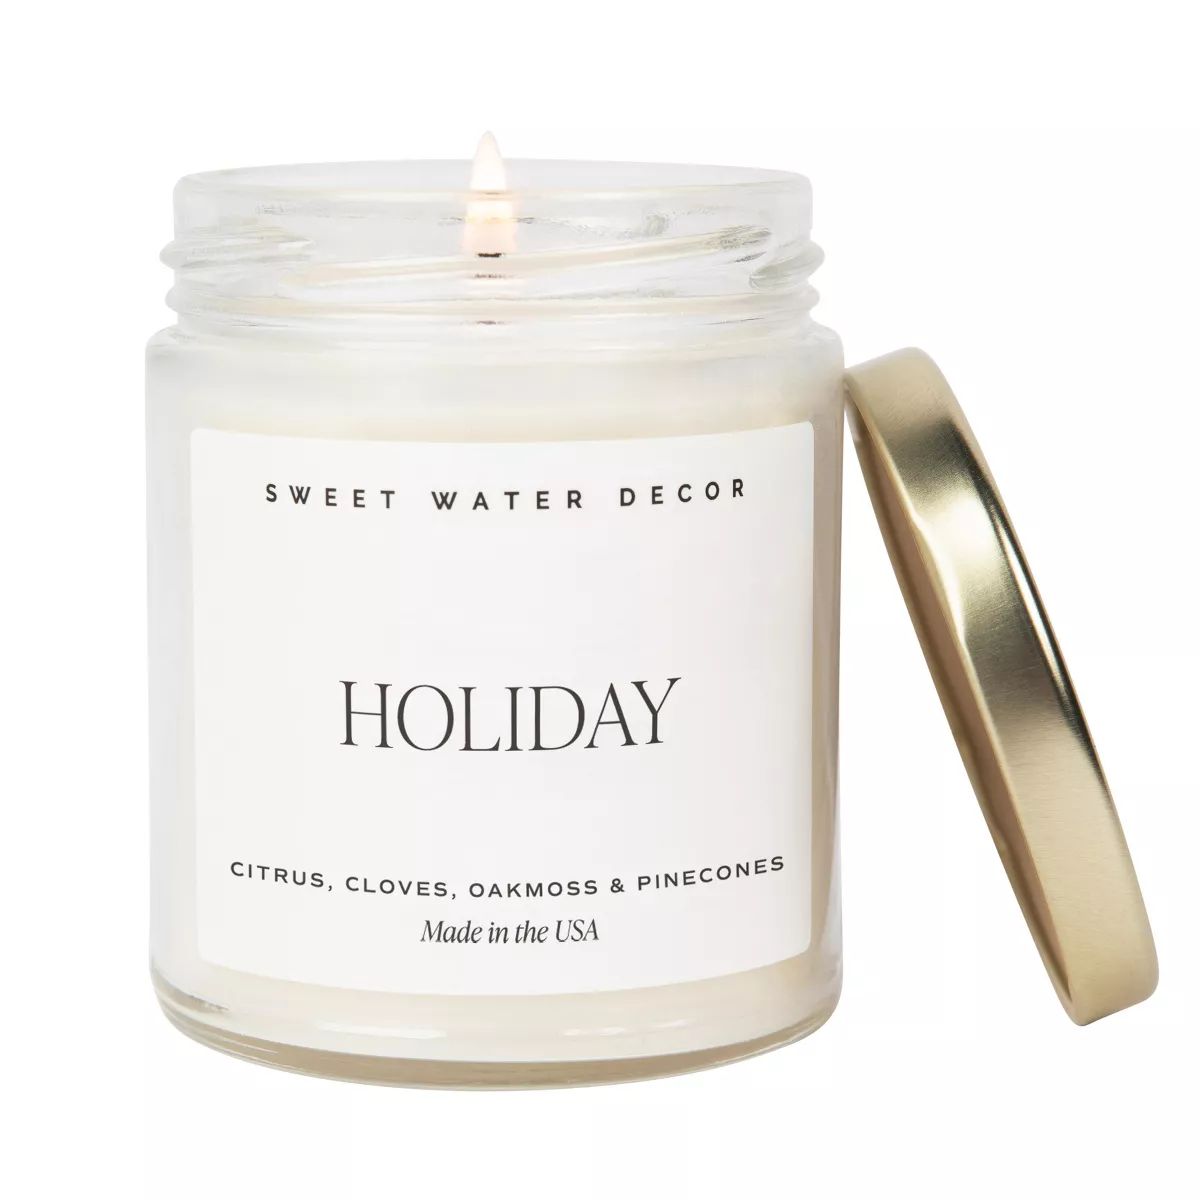 Sweet Water Decor Holiday 9oz Clear Jar Soy Candle | Target